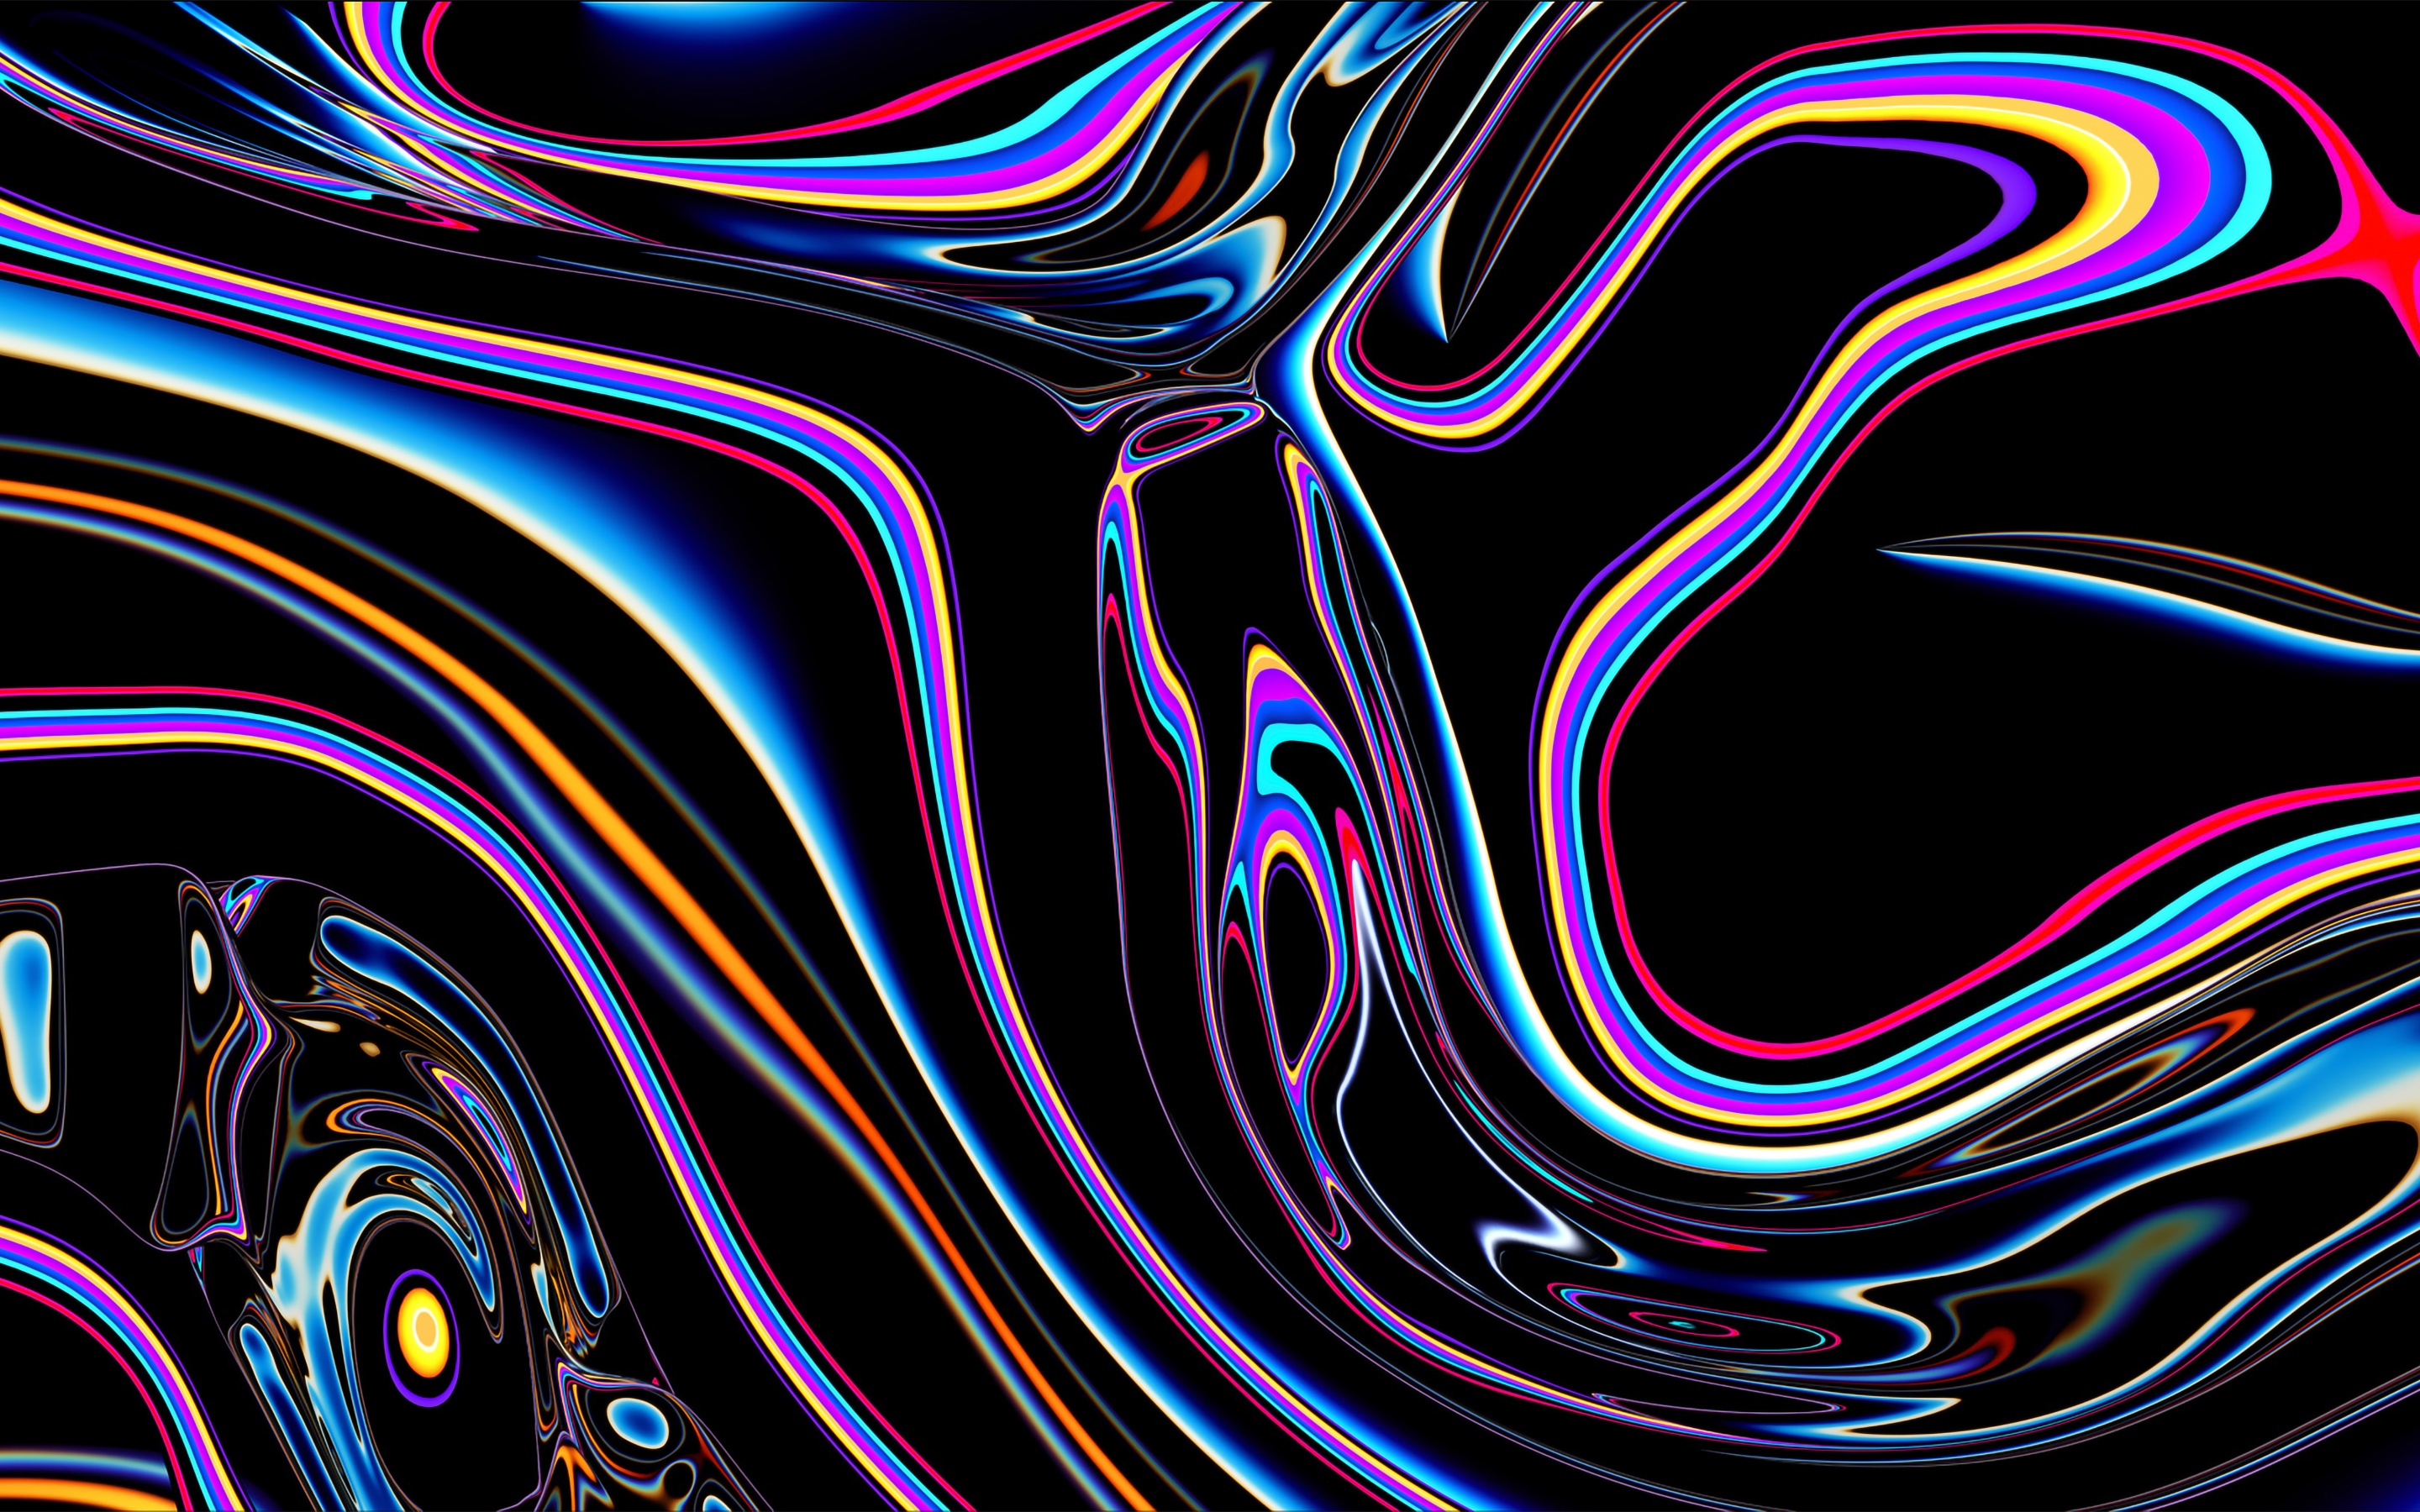 Apple Pro Display XDR Wallpaper 4K, Stock, 5K, Psychedelic, Abstract, #2303